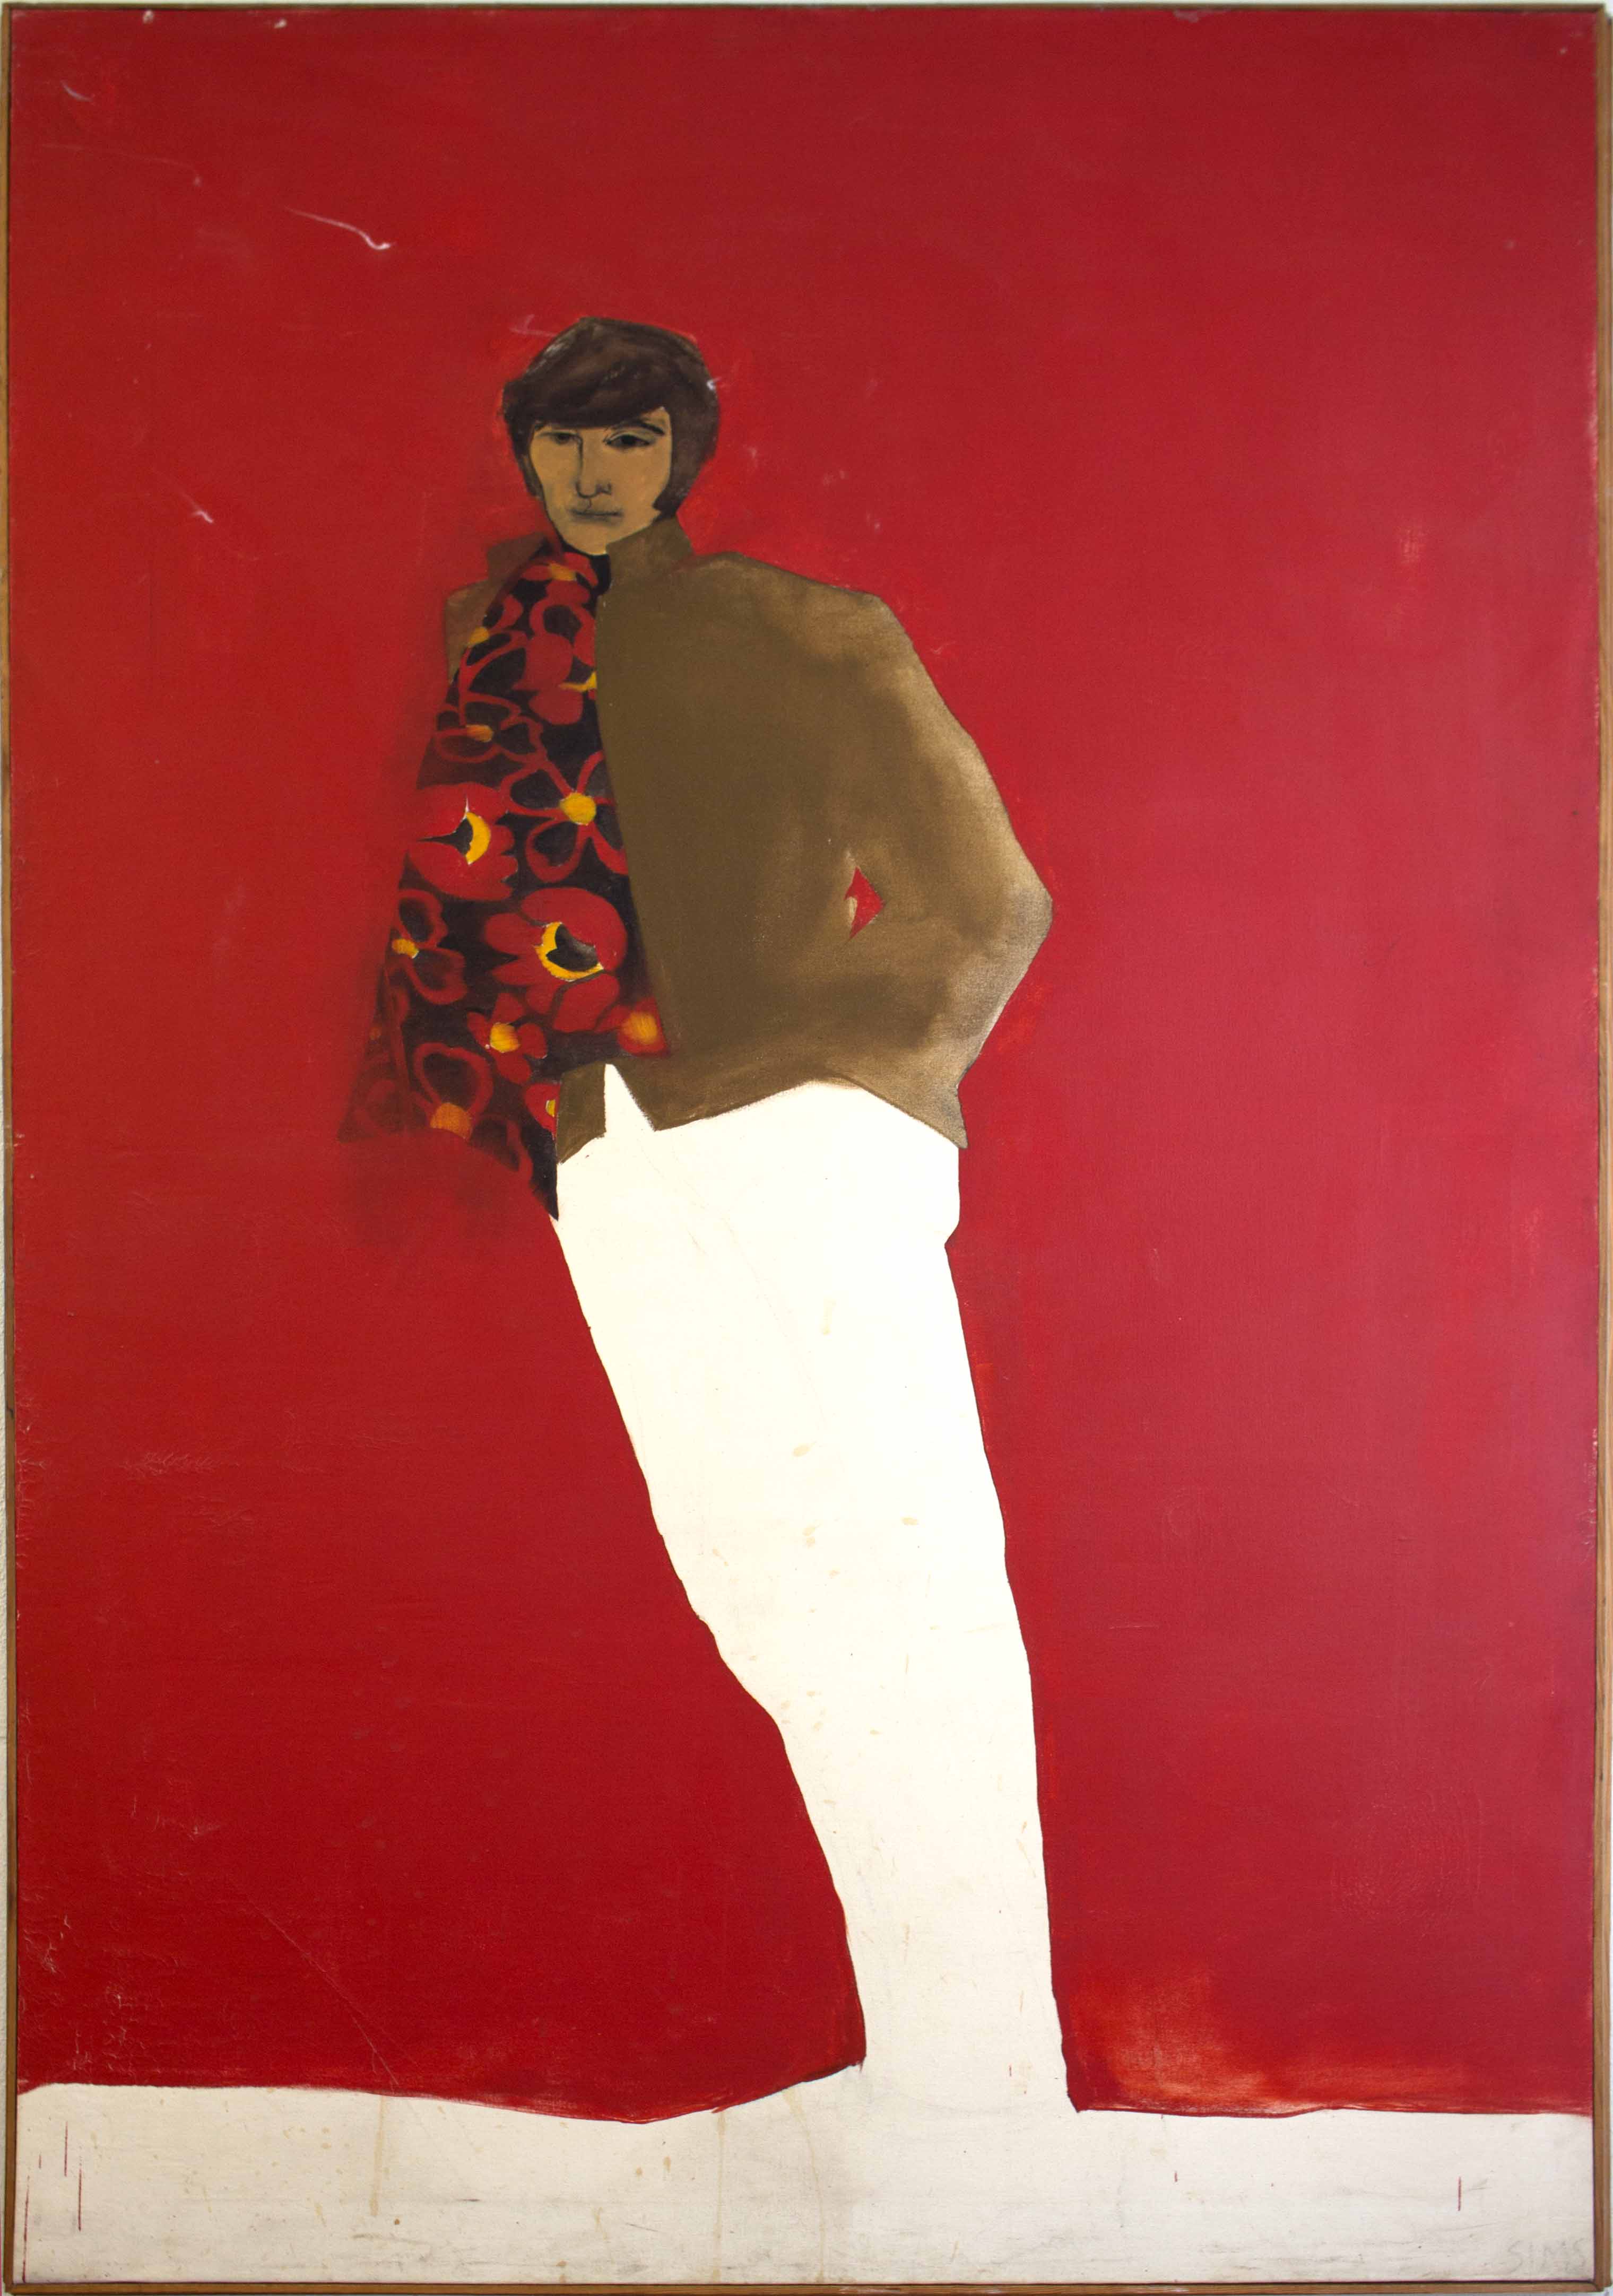 This is a painting of a man with white pants, a brown shirt, and a black and red flowered tie on a red background. The bottom of the painting has a strip of white that the man's feet blend into.